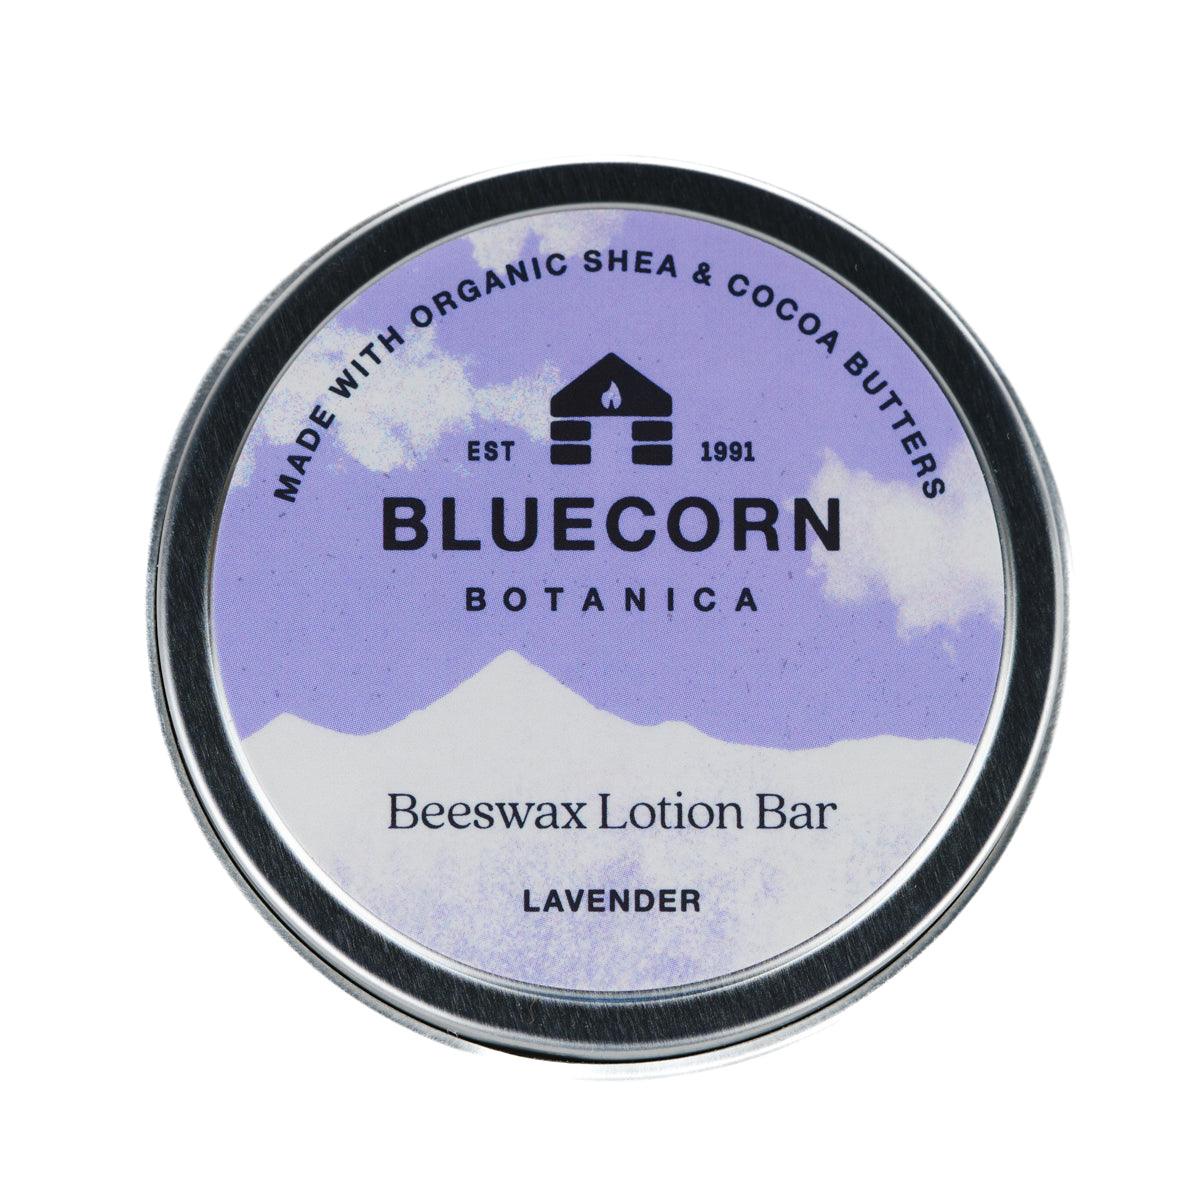 Bluecorn Botanica Beeswax Lotion Bar in Lavender. Made with Organic Shea Butter, Organic Cocoa Butter, Avocado Oil, Apricot Oil, Cappings Beeswax, Essential Oils. Using the warmth of your hands, these solids bars will turn into lotions. Can be used all over the body and come in a convenient tin. Features purple Bluecorn Botanica Label on aluminum tin with opened lid showing lotion bar. Lotion bar is cream in color and features Bluecorn cabin.